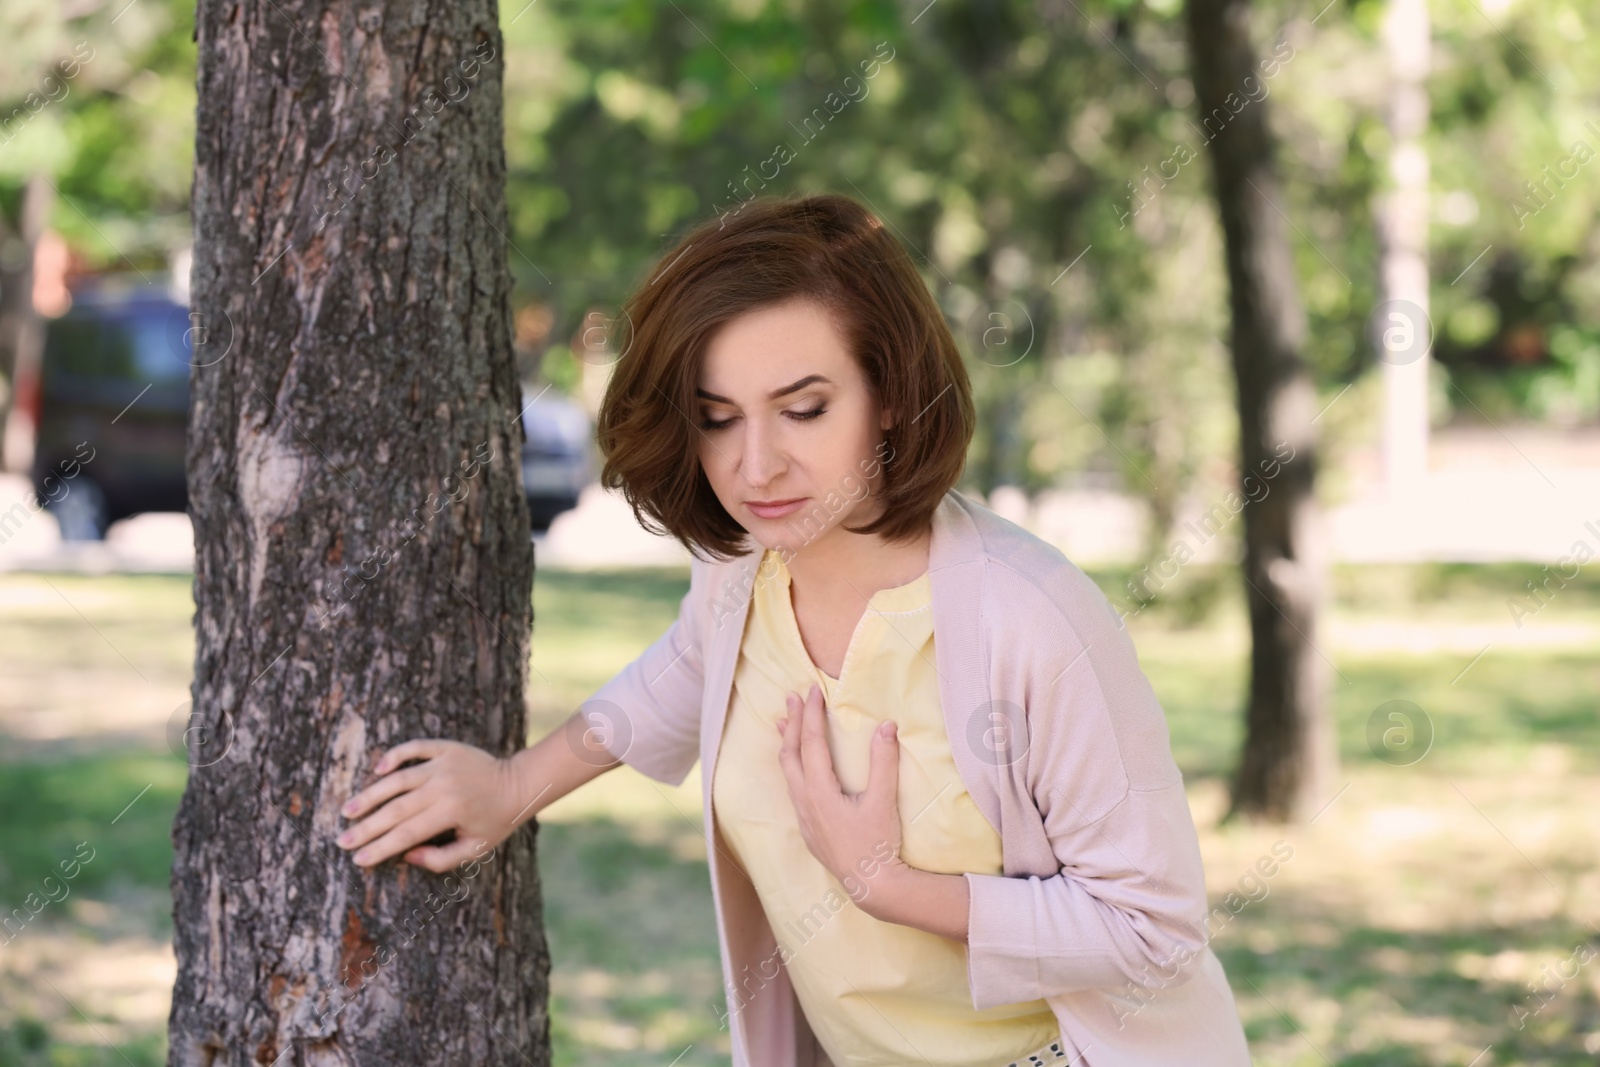 Photo of Mature woman having heart attack near tree in park